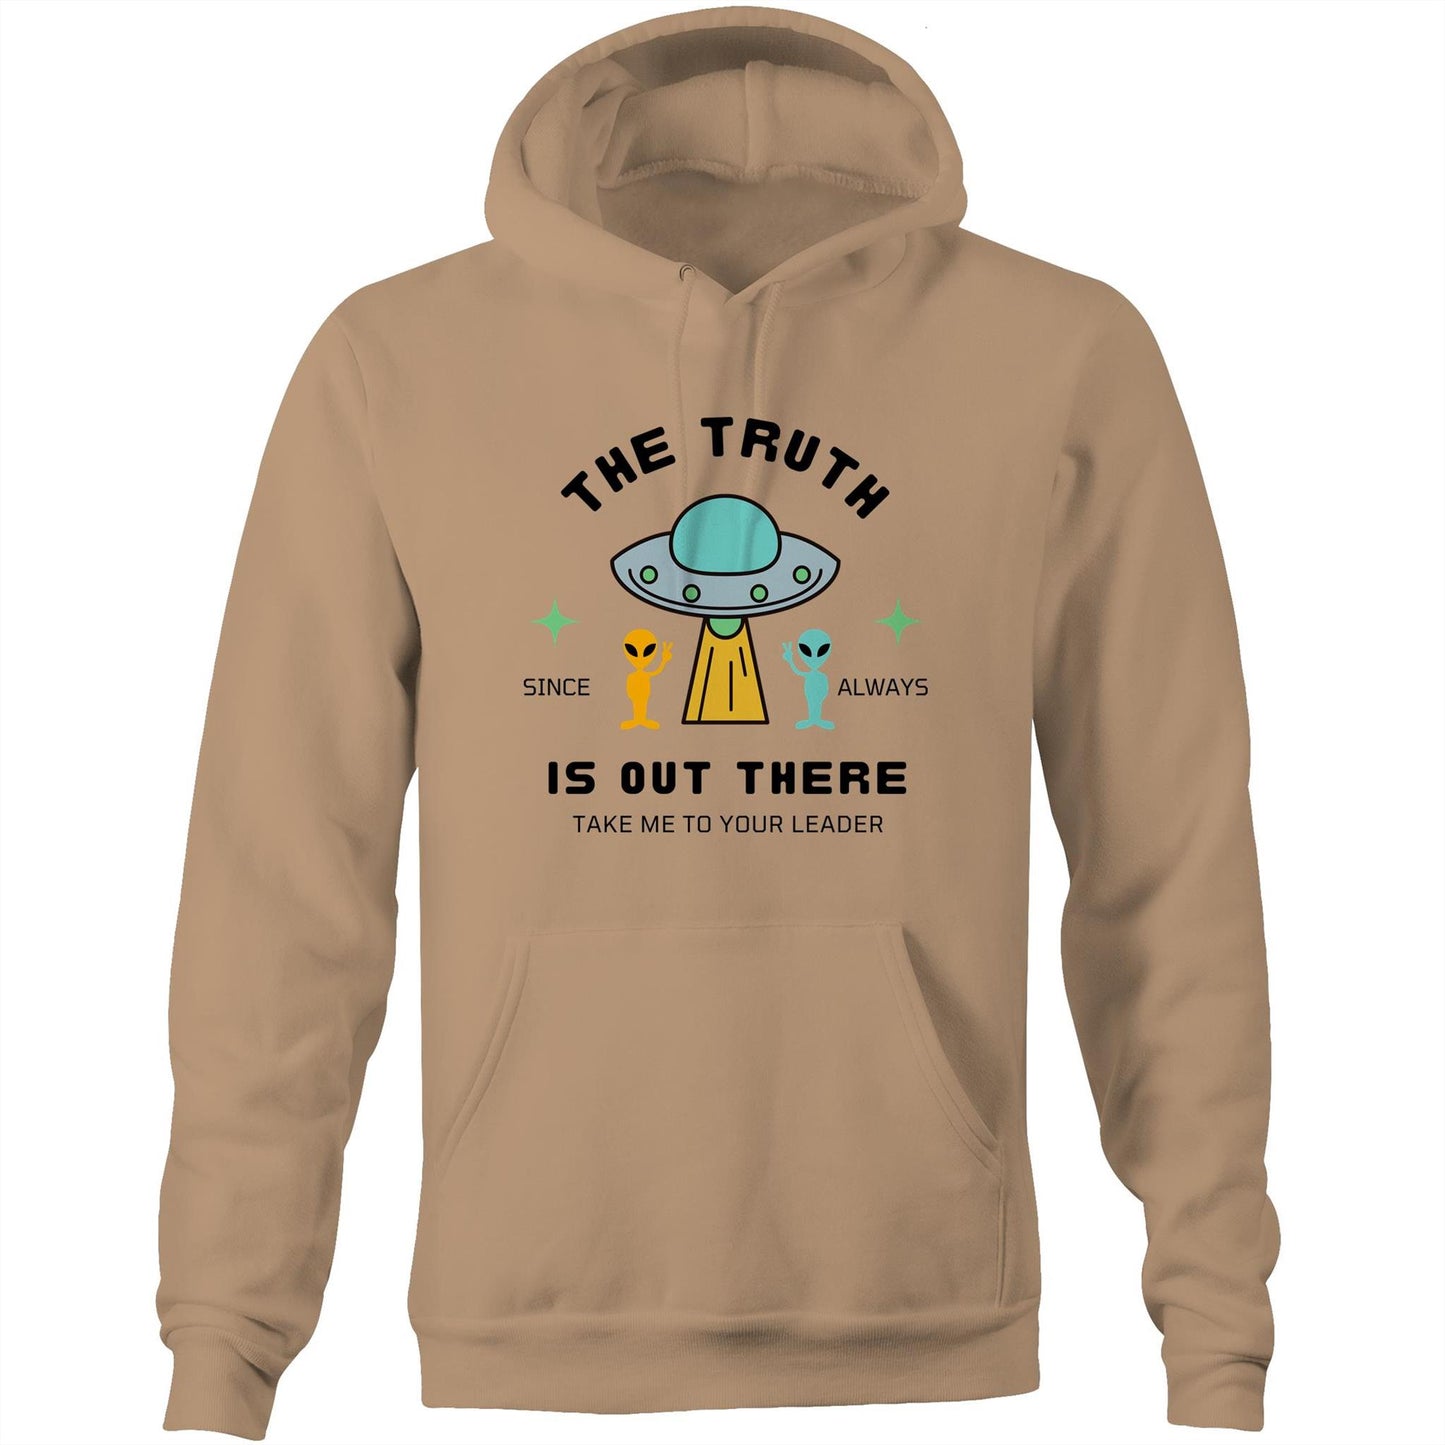 The Truth Is Out There - Pocket Hoodie Sweatshirt Tan Hoodie Sci Fi